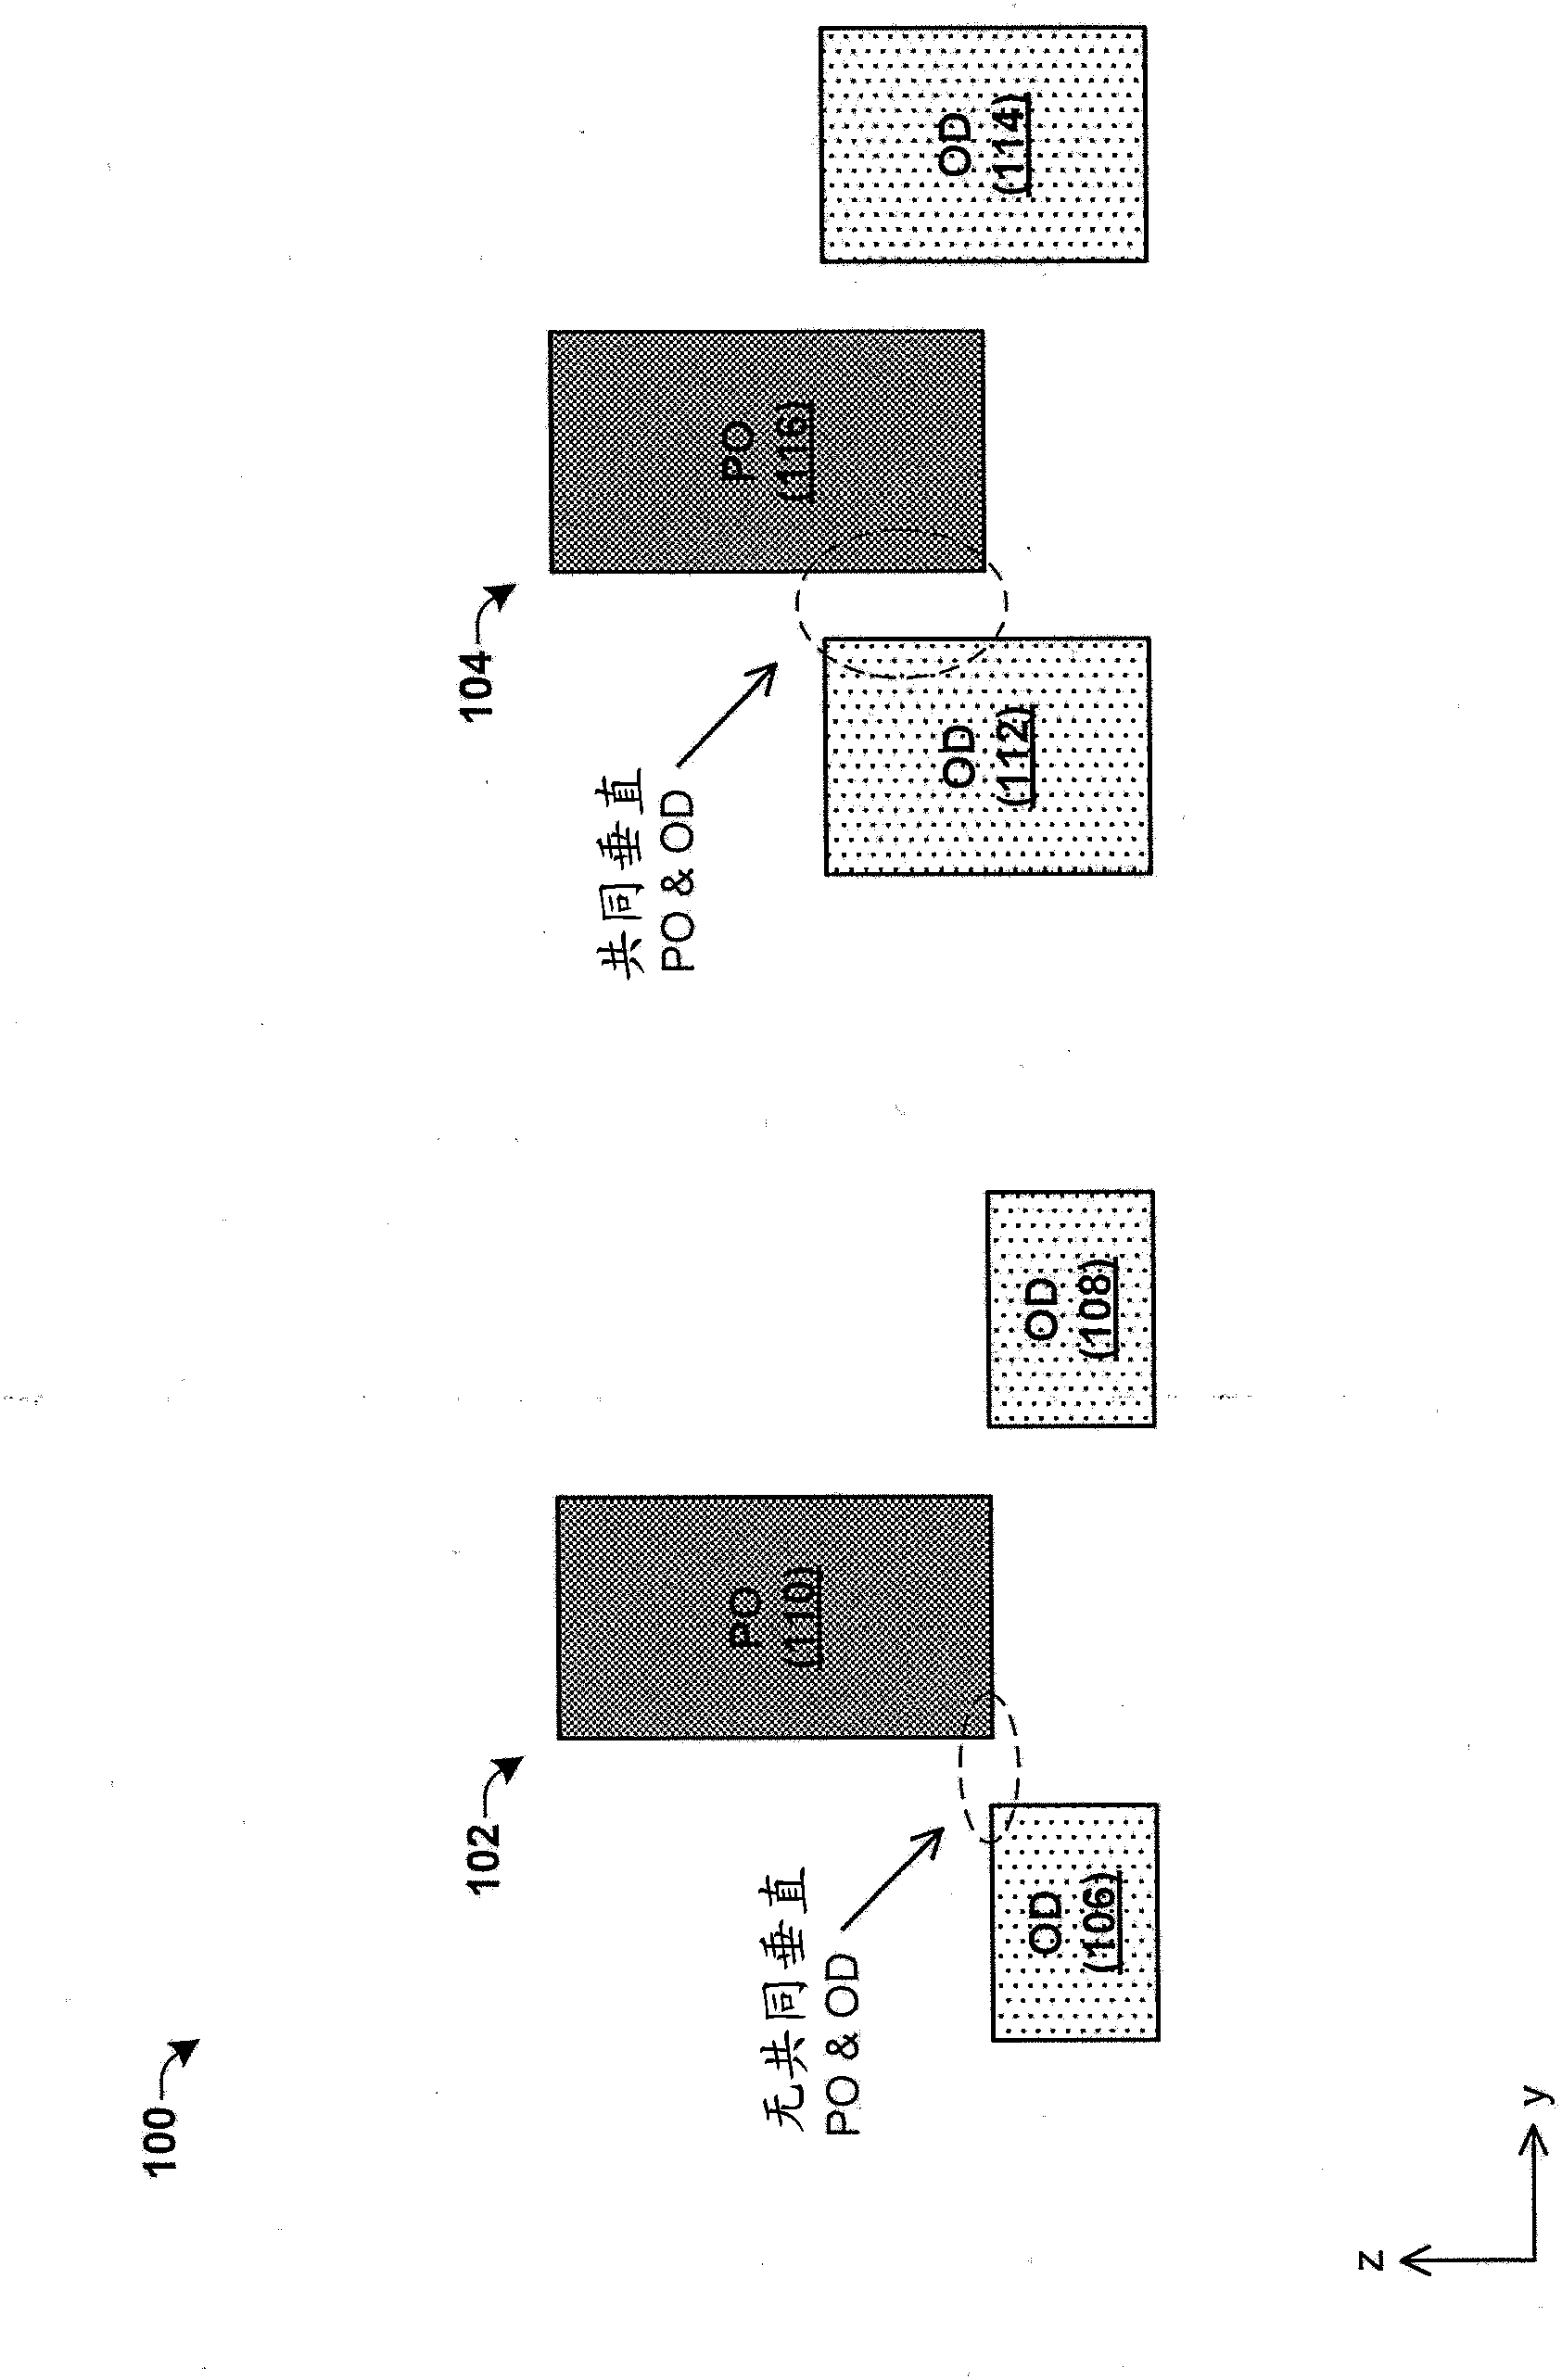 Pattern Matching Based Parasitic Extraction With Pattern Reuse